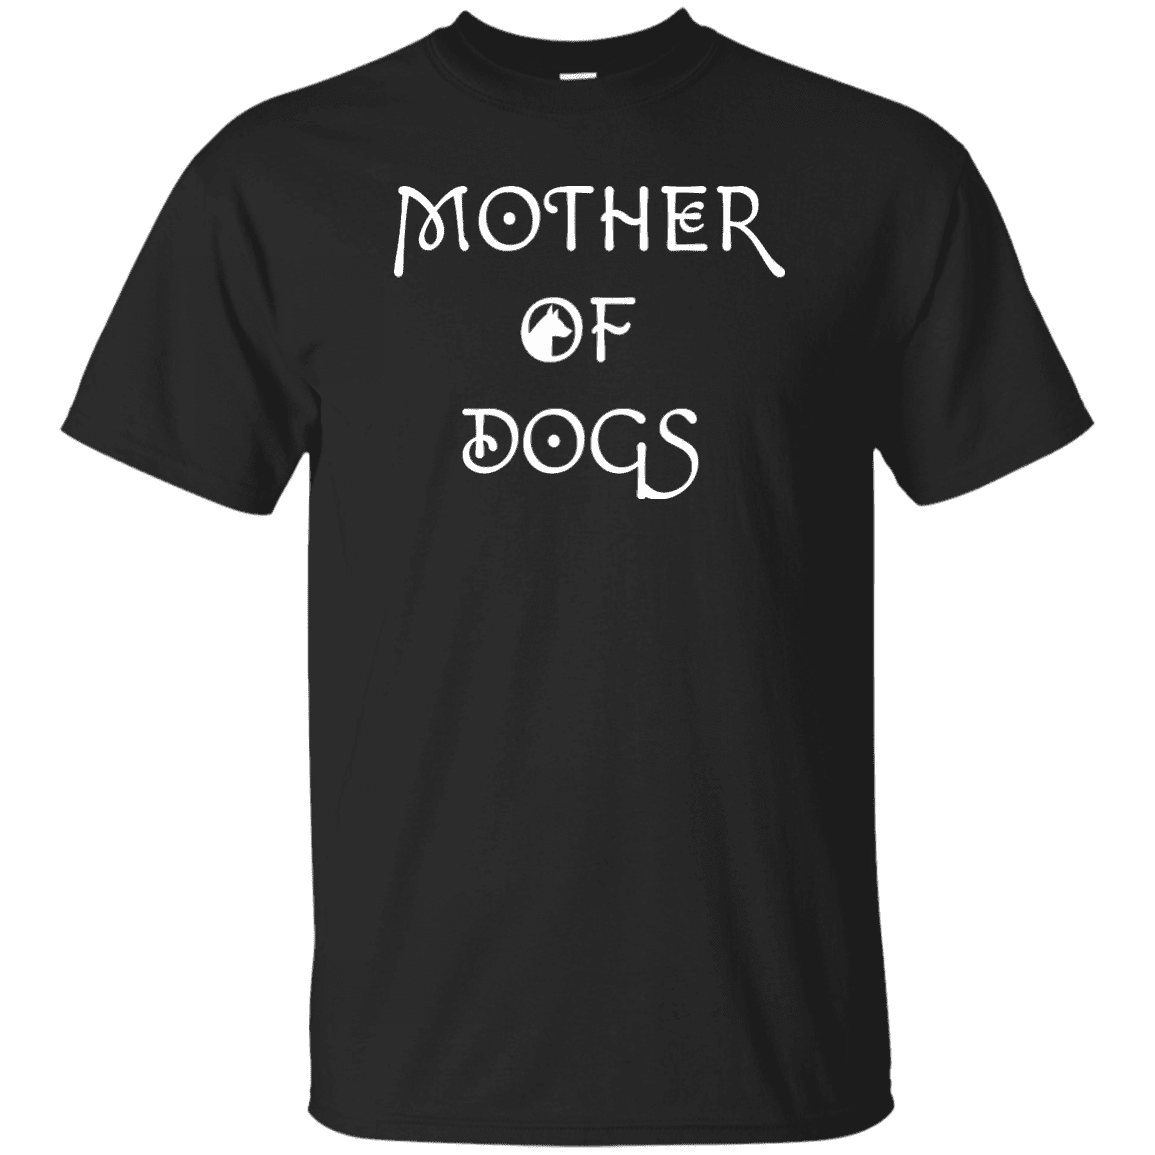 Mother Of Dogs - T Shirt.